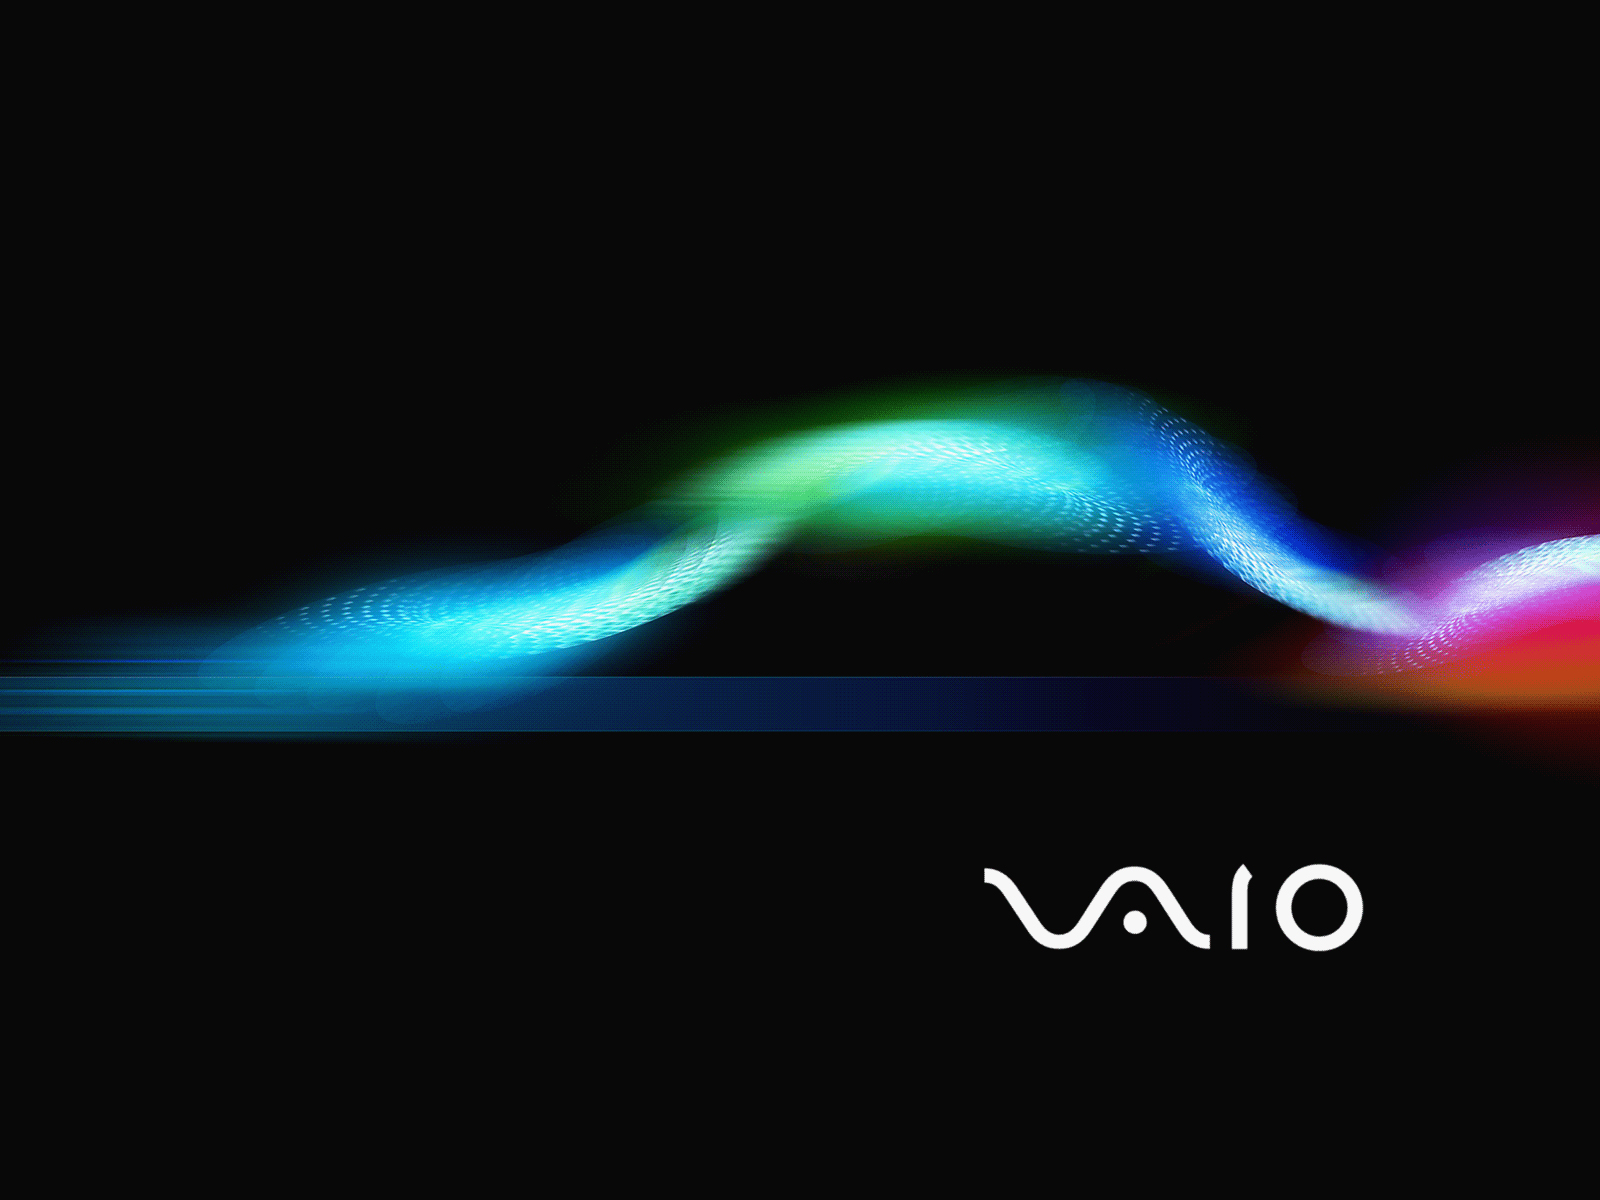 X Jpeg 561kb HD Sony Vaio Wallpaper Background For